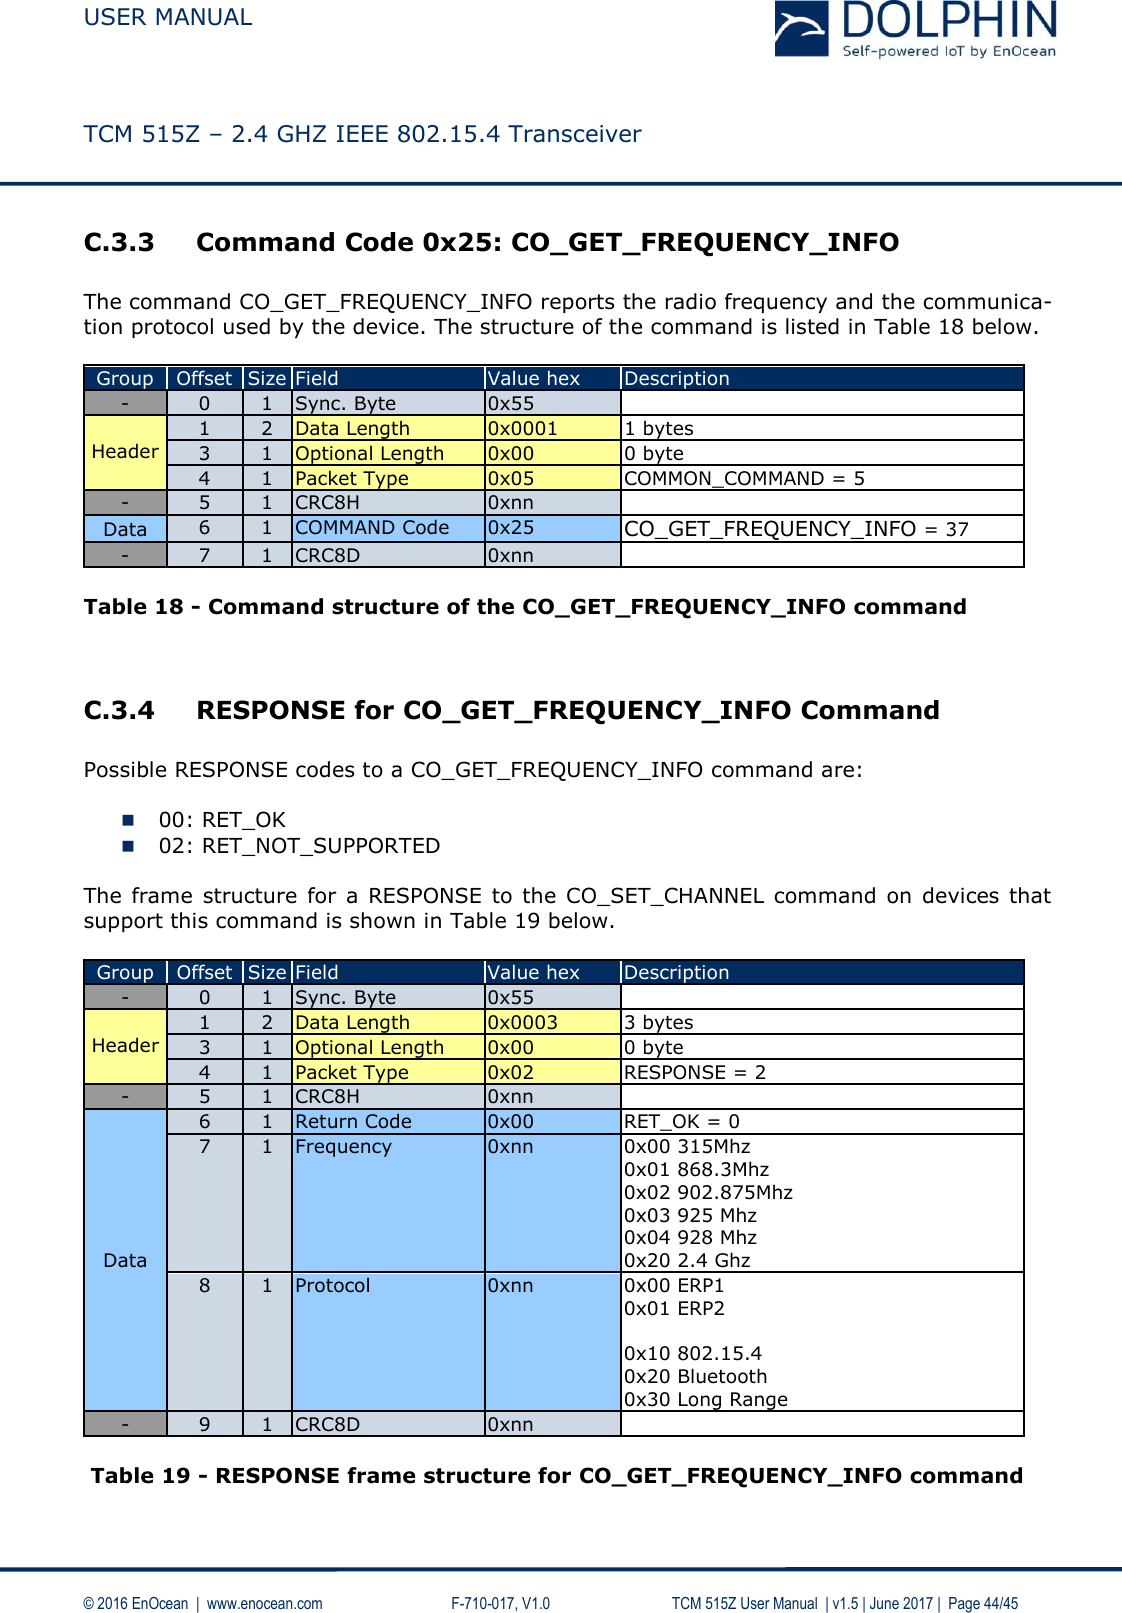  USER MANUAL    TCM 515Z – 2.4 GHZ IEEE 802.15.4 Transceiver   © 2016 EnOcean  |  www.enocean.com     F-710-017, V1.0        TCM 515Z User Manual  | v1.5 | June 2017 |  Page 44/45 C.3.3 Command Code 0x25: CO_GET_FREQUENCY_INFO  The command CO_GET_FREQUENCY_INFO reports the radio frequency and the communica-tion protocol used by the device. The structure of the command is listed in Table 18 below.  Group Offset Size Field Value hex Description - 0 1 Sync. Byte 0x55   Header 1 2 Data Length 0x0001 1 bytes 3 1 Optional Length 0x00 0 byte 4 1 Packet Type 0x05 COMMON_COMMAND = 5 - 5 1 CRC8H 0xnn  Data 6 1 COMMAND Code 0x25 CO_GET_FREQUENCY_INFO = 37 - 7 1 CRC8D 0xnn   Table 18 - Command structure of the CO_GET_FREQUENCY_INFO command   C.3.4 RESPONSE for CO_GET_FREQUENCY_INFO Command  Possible RESPONSE codes to a CO_GET_FREQUENCY_INFO command are:   00: RET_OK  02: RET_NOT_SUPPORTED  The frame  structure  for  a  RESPONSE to the  CO_SET_CHANNEL command on devices that support this command is shown in Table 19 below.  Group Offset Size Field Value hex Description - 0 1 Sync. Byte 0x55   Header 1 2 Data Length 0x0003 3 bytes 3 1 Optional Length 0x00 0 byte 4 1 Packet Type 0x02 RESPONSE = 2 - 5 1 CRC8H 0xnn  Data 6 1 Return Code 0x00 RET_OK = 0 7 1 Frequency 0xnn 0x00 315Mhz 0x01 868.3Mhz 0x02 902.875Mhz 0x03 925 Mhz 0x04 928 Mhz 0x20 2.4 Ghz 8 1 Protocol  0xnn 0x00 ERP1 0x01 ERP2  0x10 802.15.4 0x20 Bluetooth 0x30 Long Range - 9 1 CRC8D 0xnn    Table 19 - RESPONSE frame structure for CO_GET_FREQUENCY_INFO command    